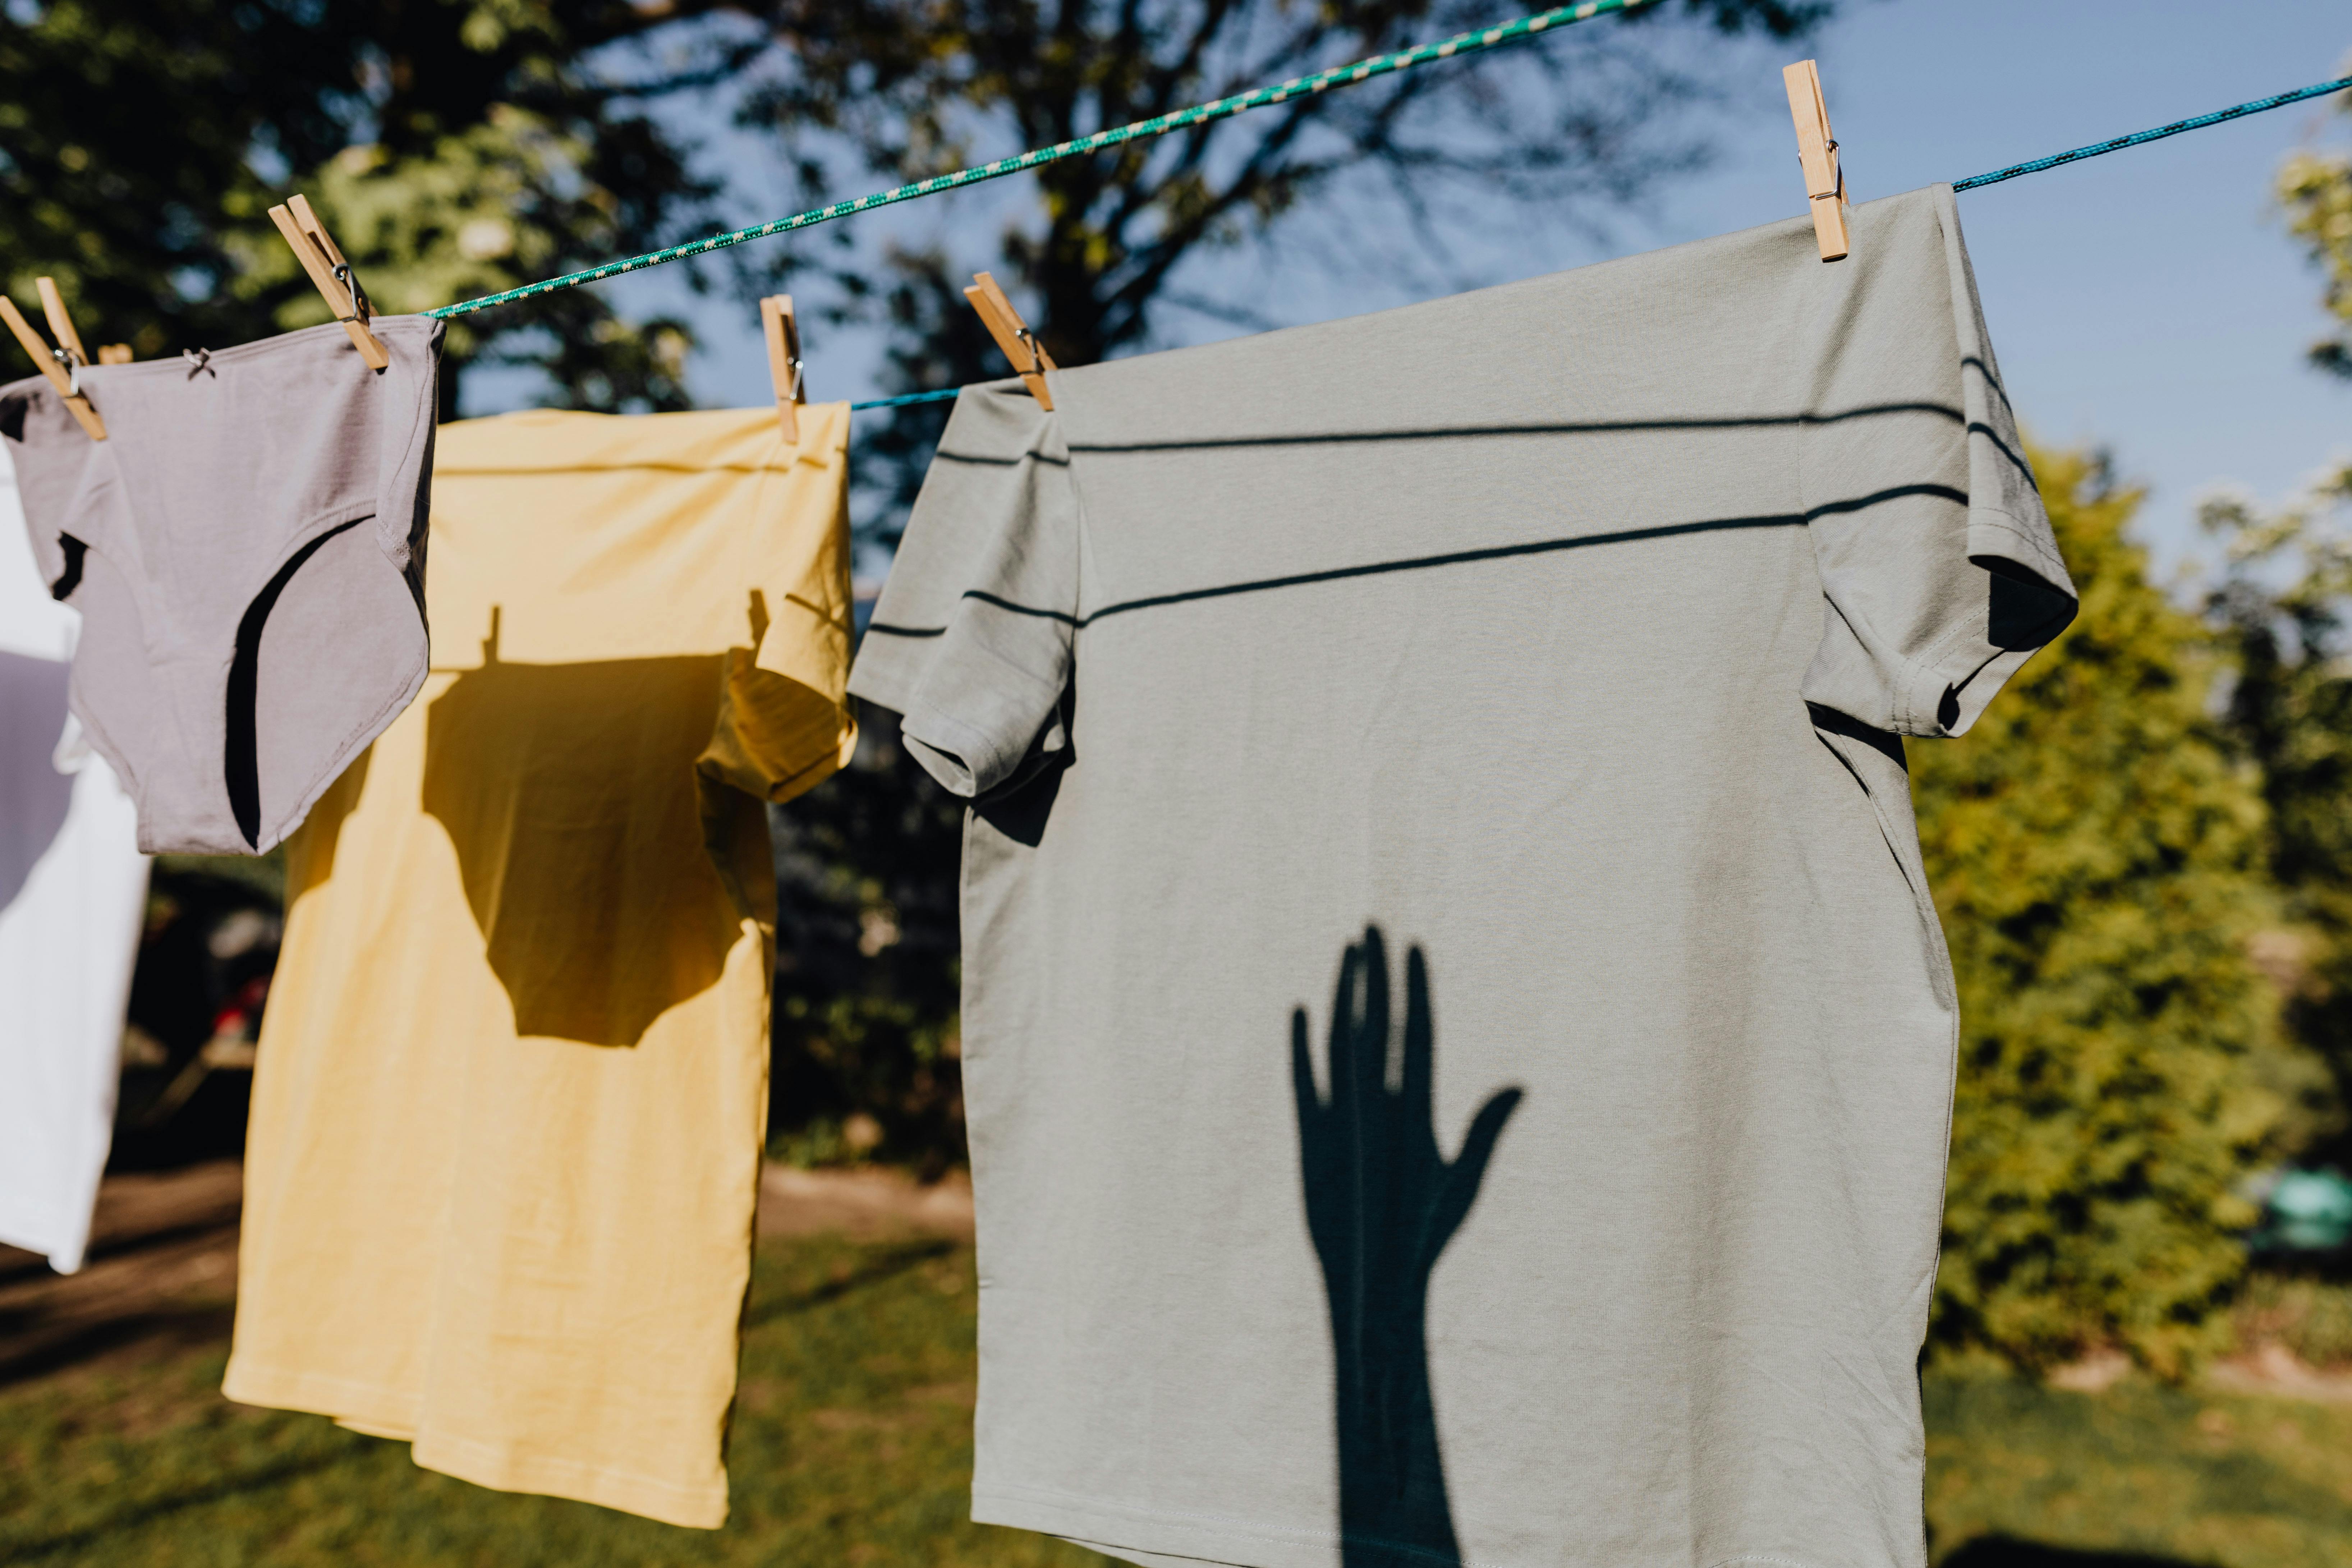 Clothes drying on rope with clothespins in garden · Free Stock Photo